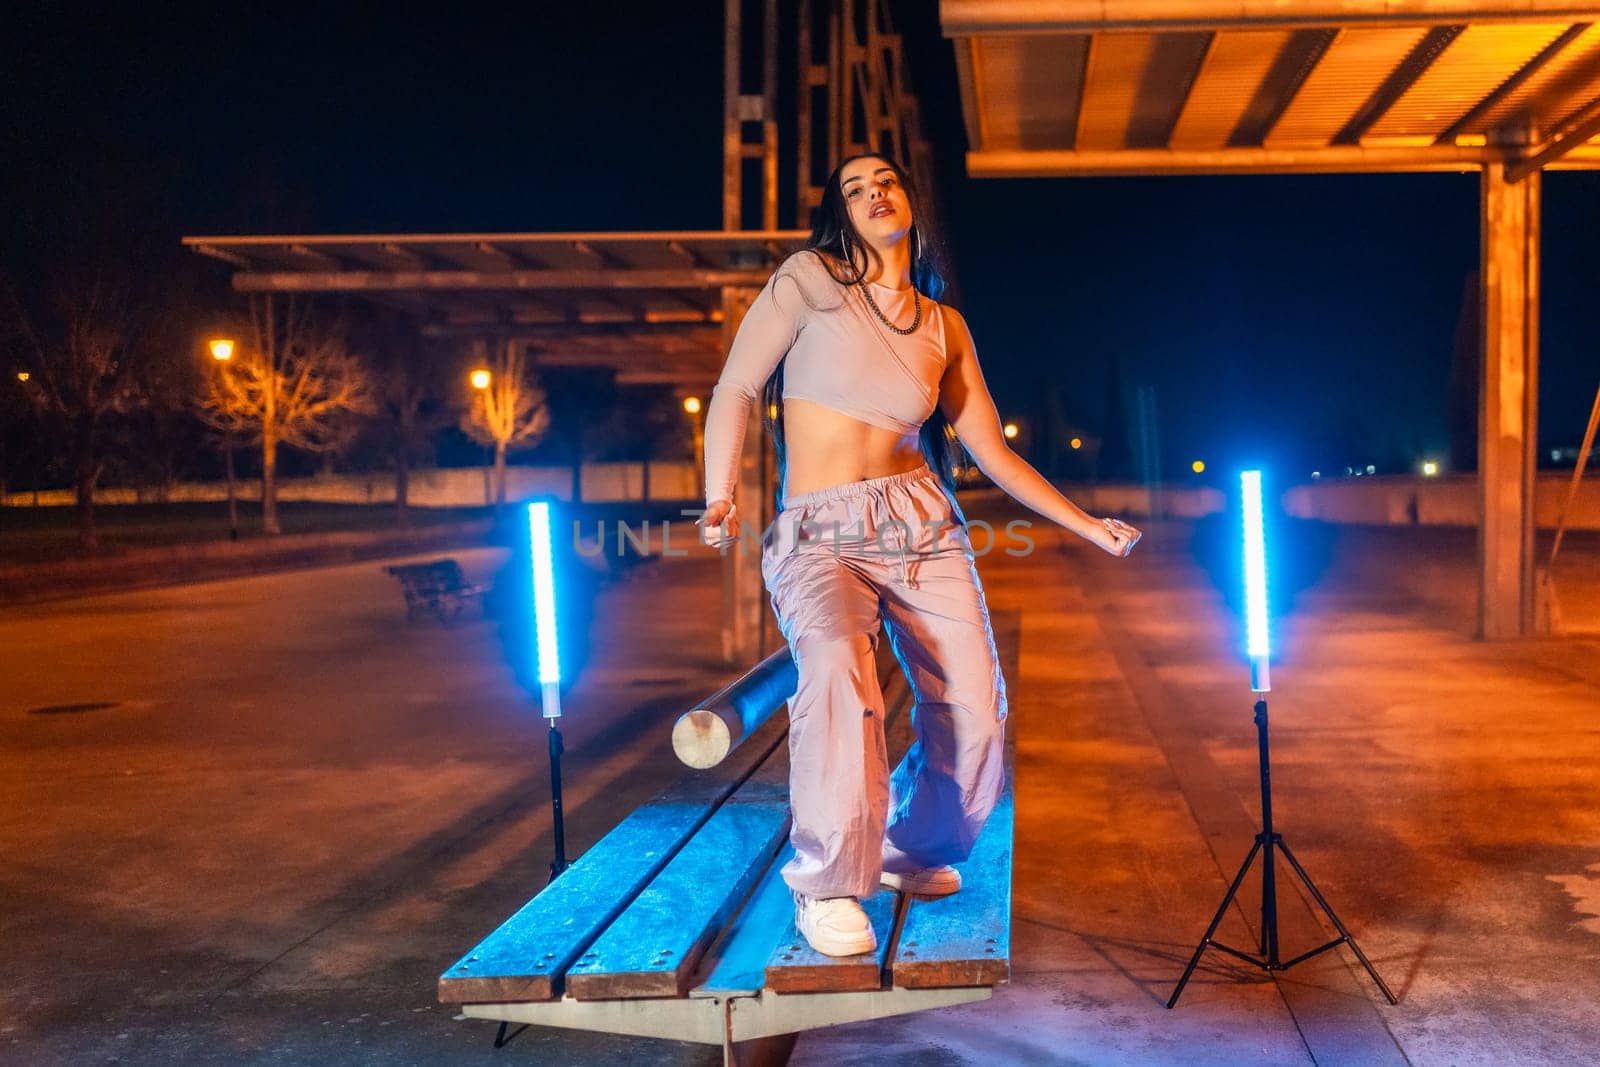 Portrait of a trap artist dancing on a park table at night surrounded by neon lights